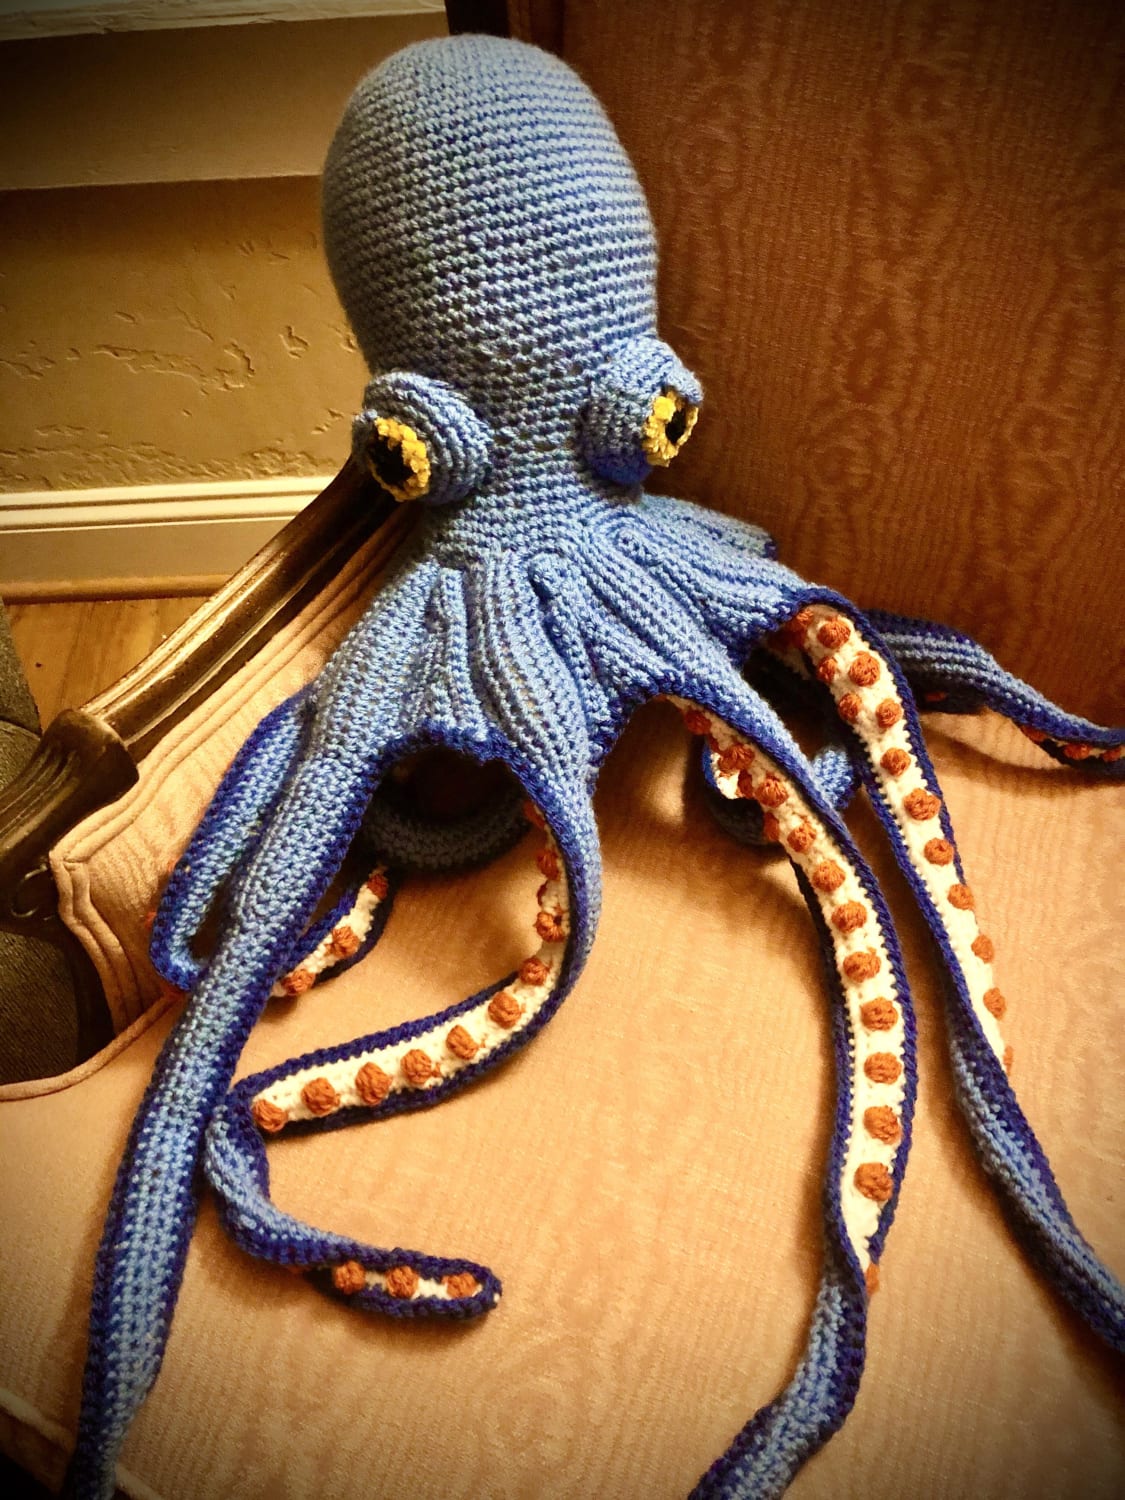 Expecting our first child in September. My mother crocheted an octopus for her, suckers and all.